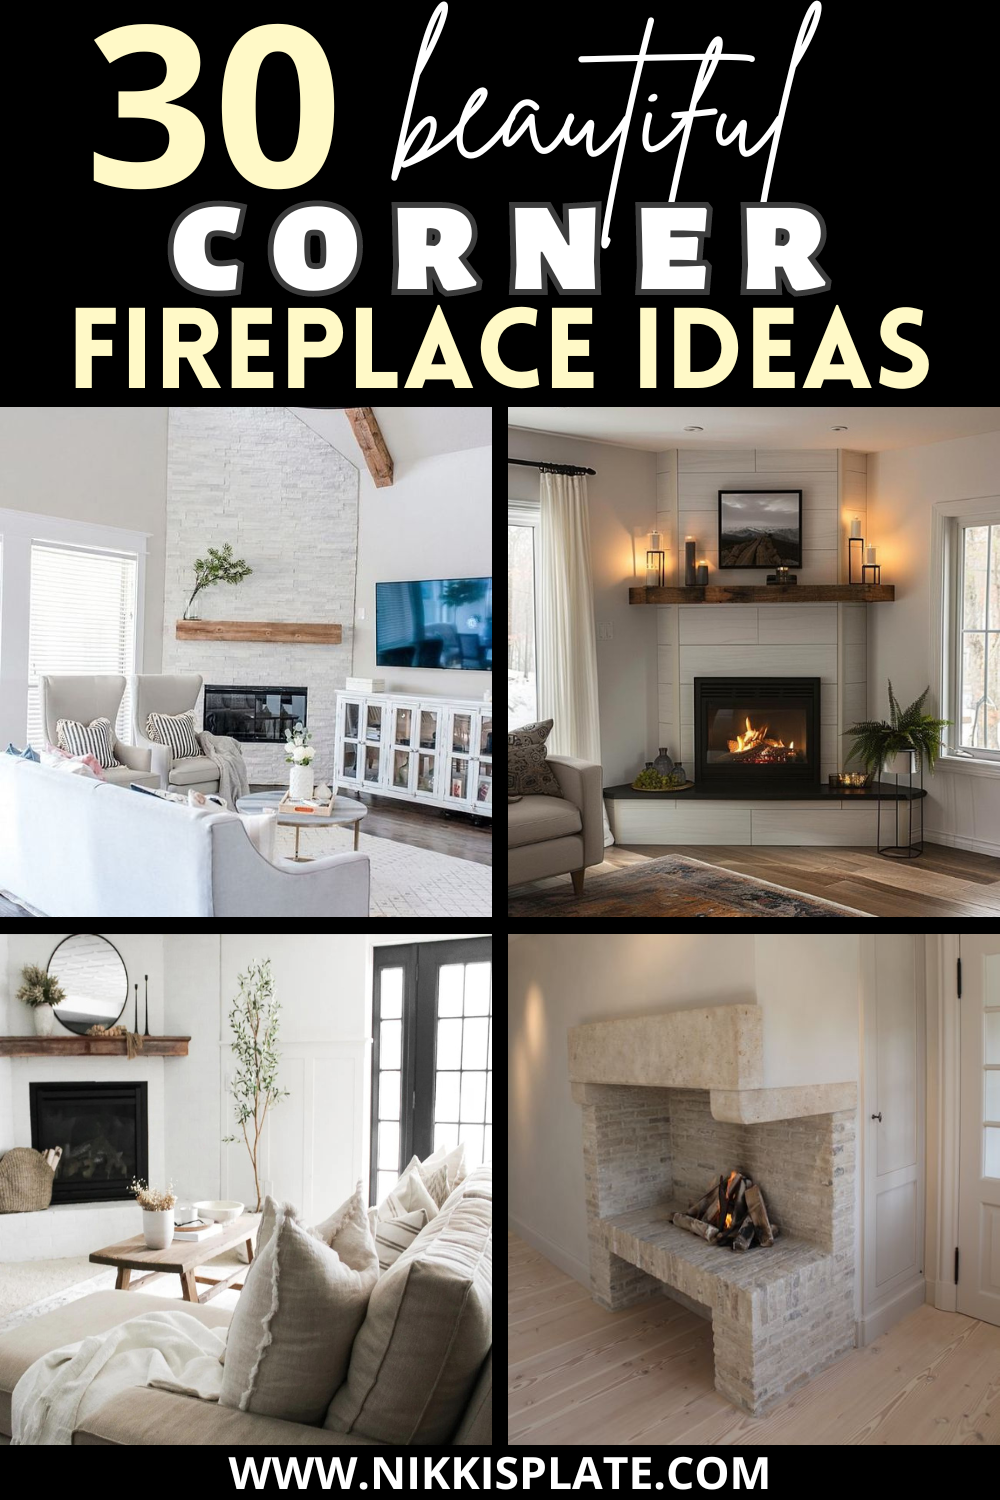 30 Cozy Corner Fireplace Ideas to Bring Warmth to Your Space - Dive into my guide for creating a stunning corner fireplace that's all about cozy vibes and style. I've got the tips and ideas to make your space warm, welcoming, and oh-so-chic.